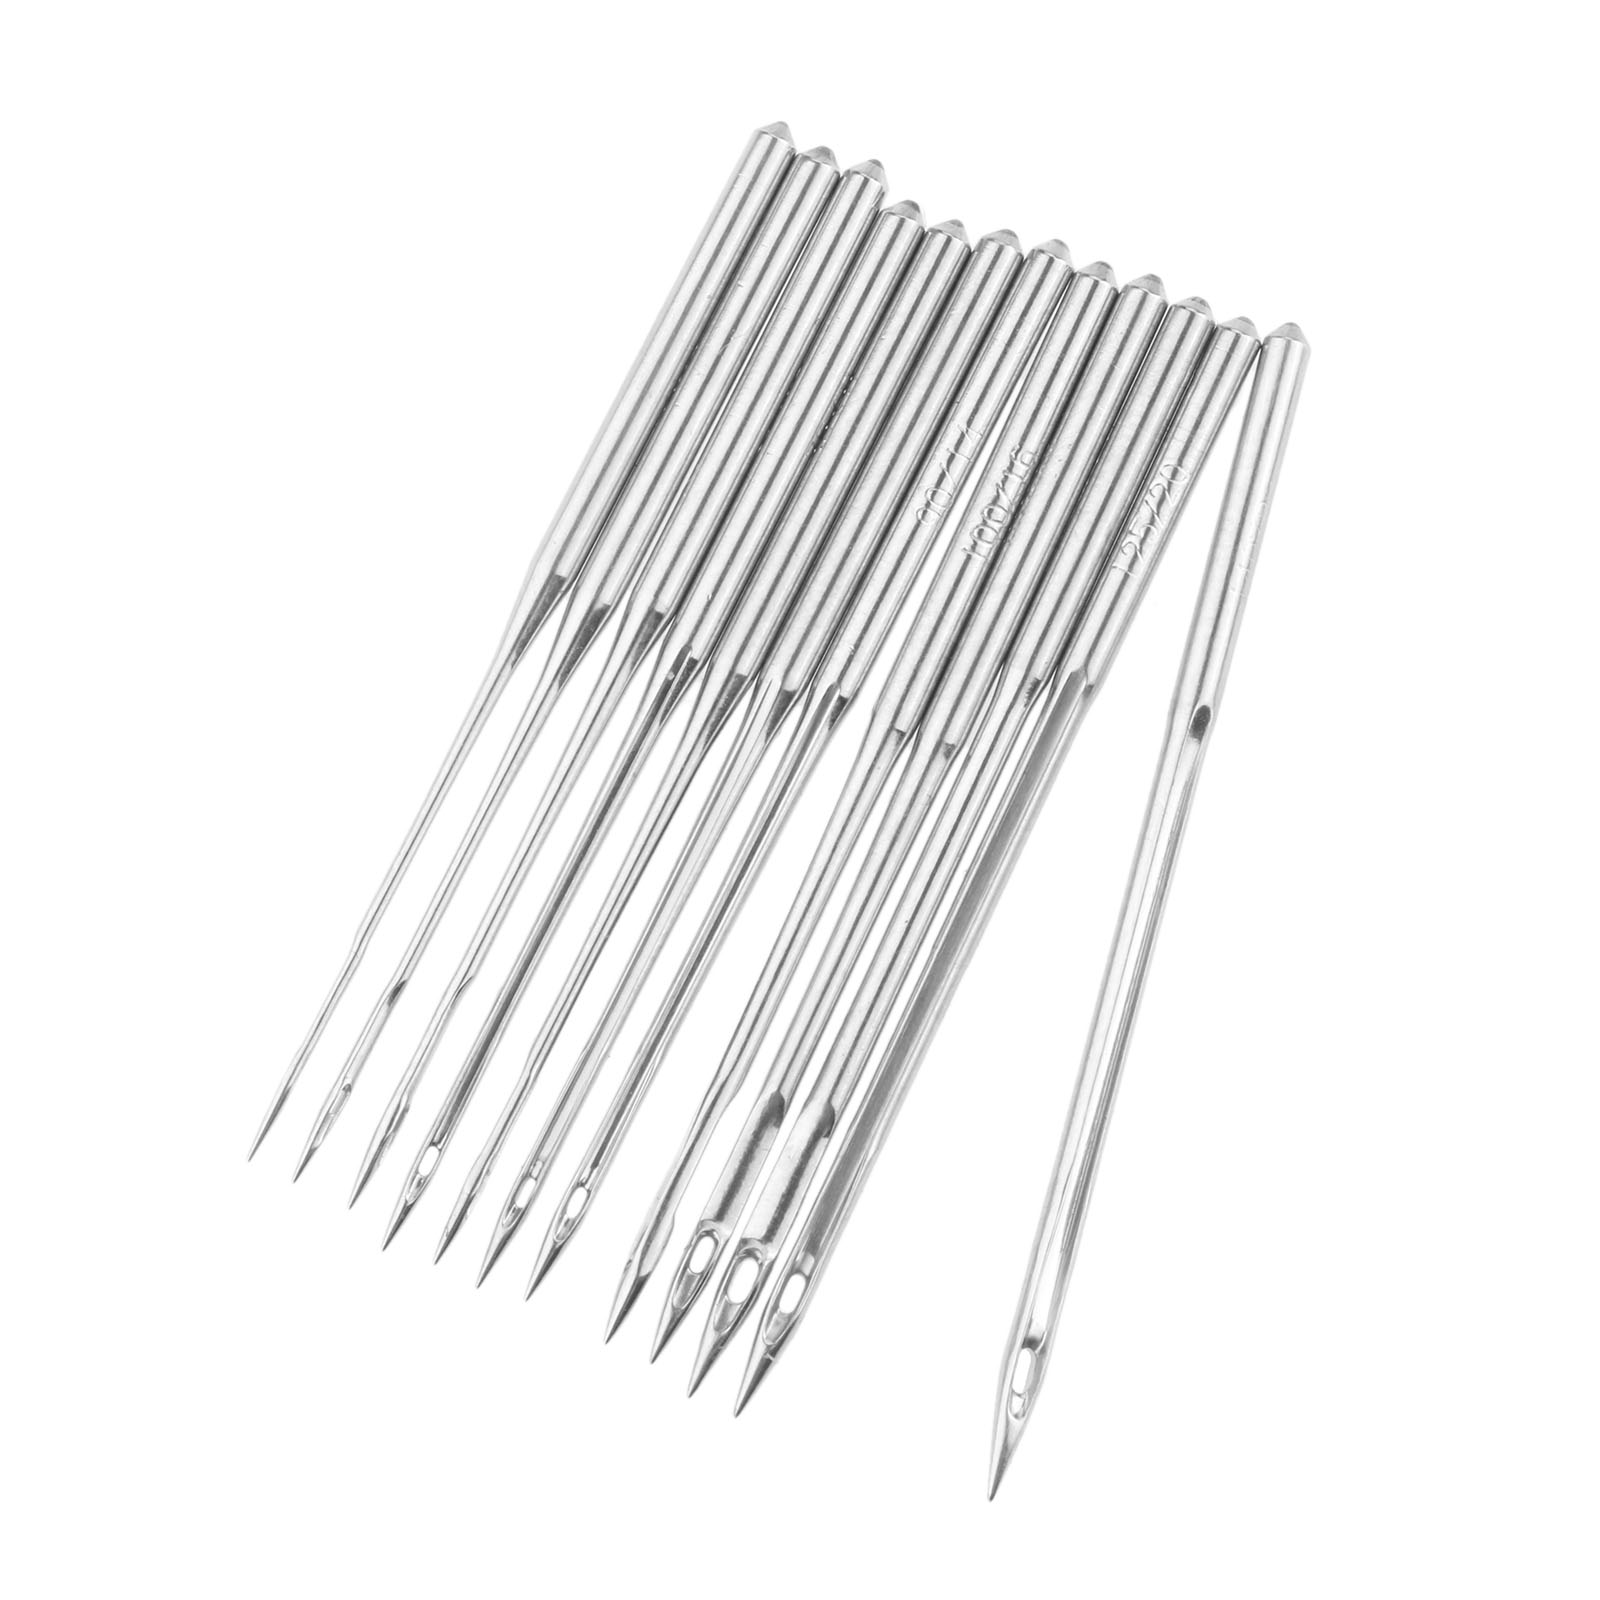 DRELD 10Pcs/lot DB*1 Sewing Needles 7#-22# Fit for JUKI BROTHER Singer Needles Industrial Lockstitch Sewing Machines